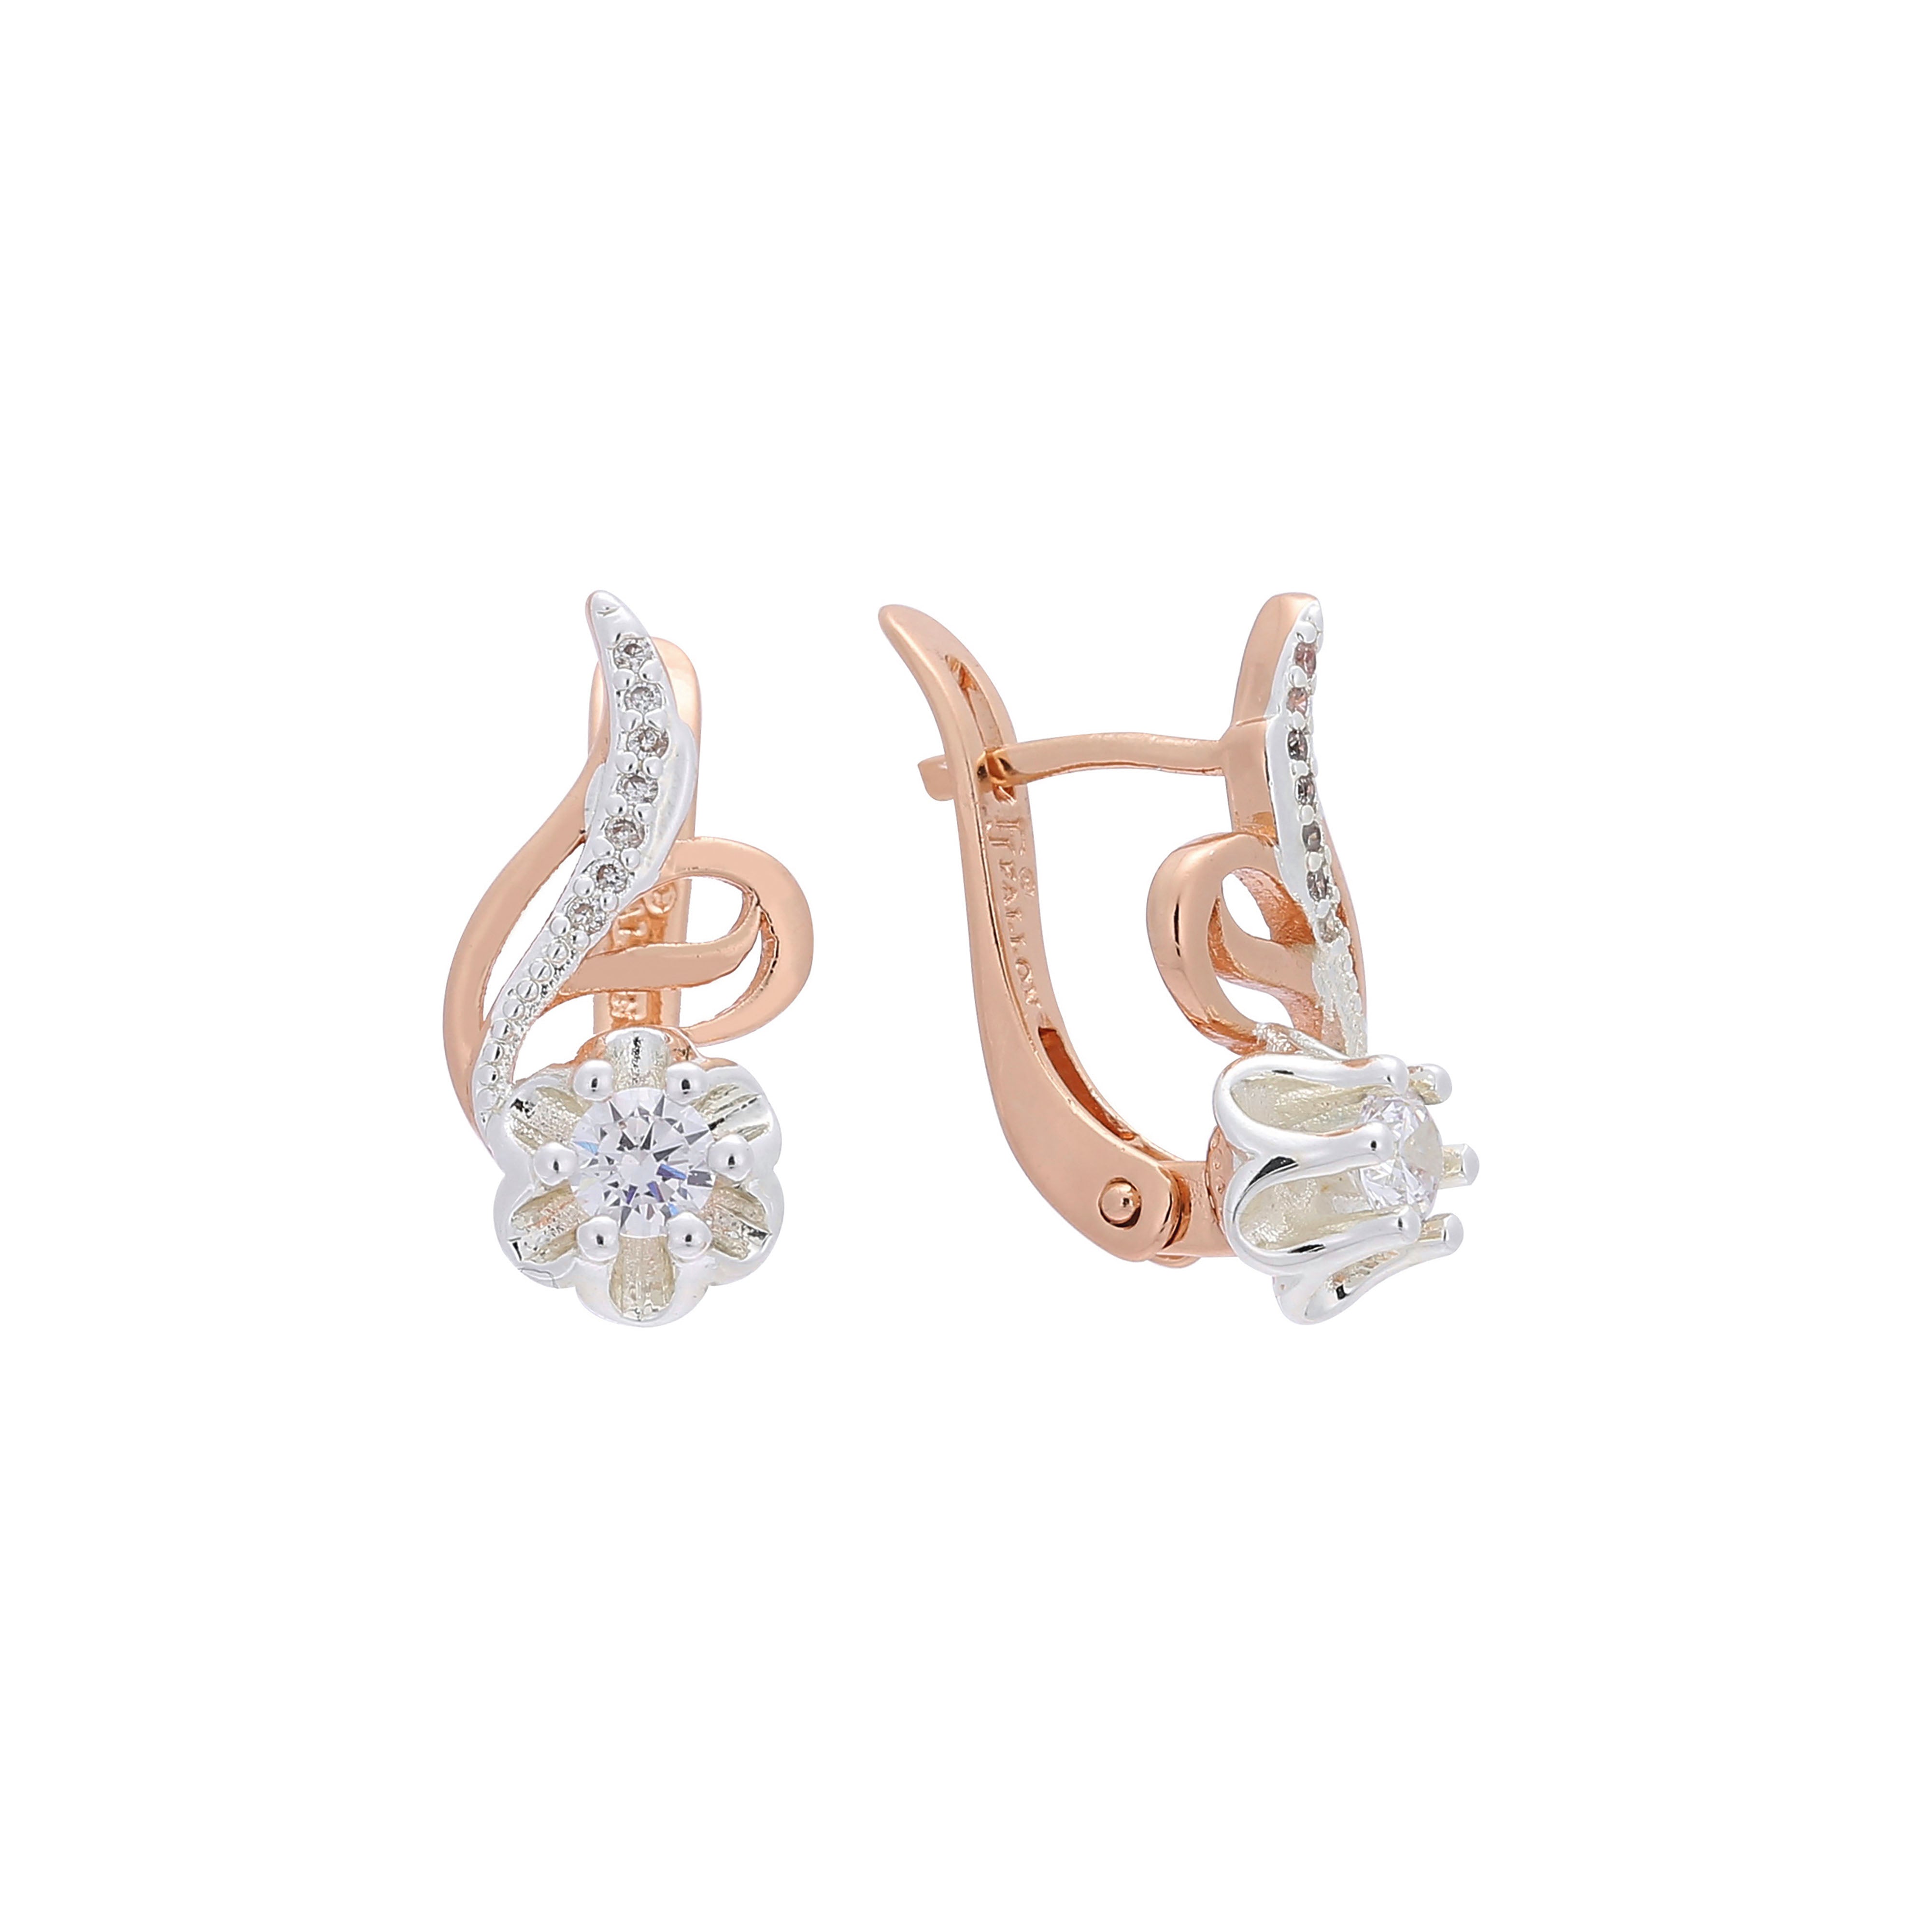 Solitaire flower stone earrings in 14K Gold, Rose Gold, two tone plating colors